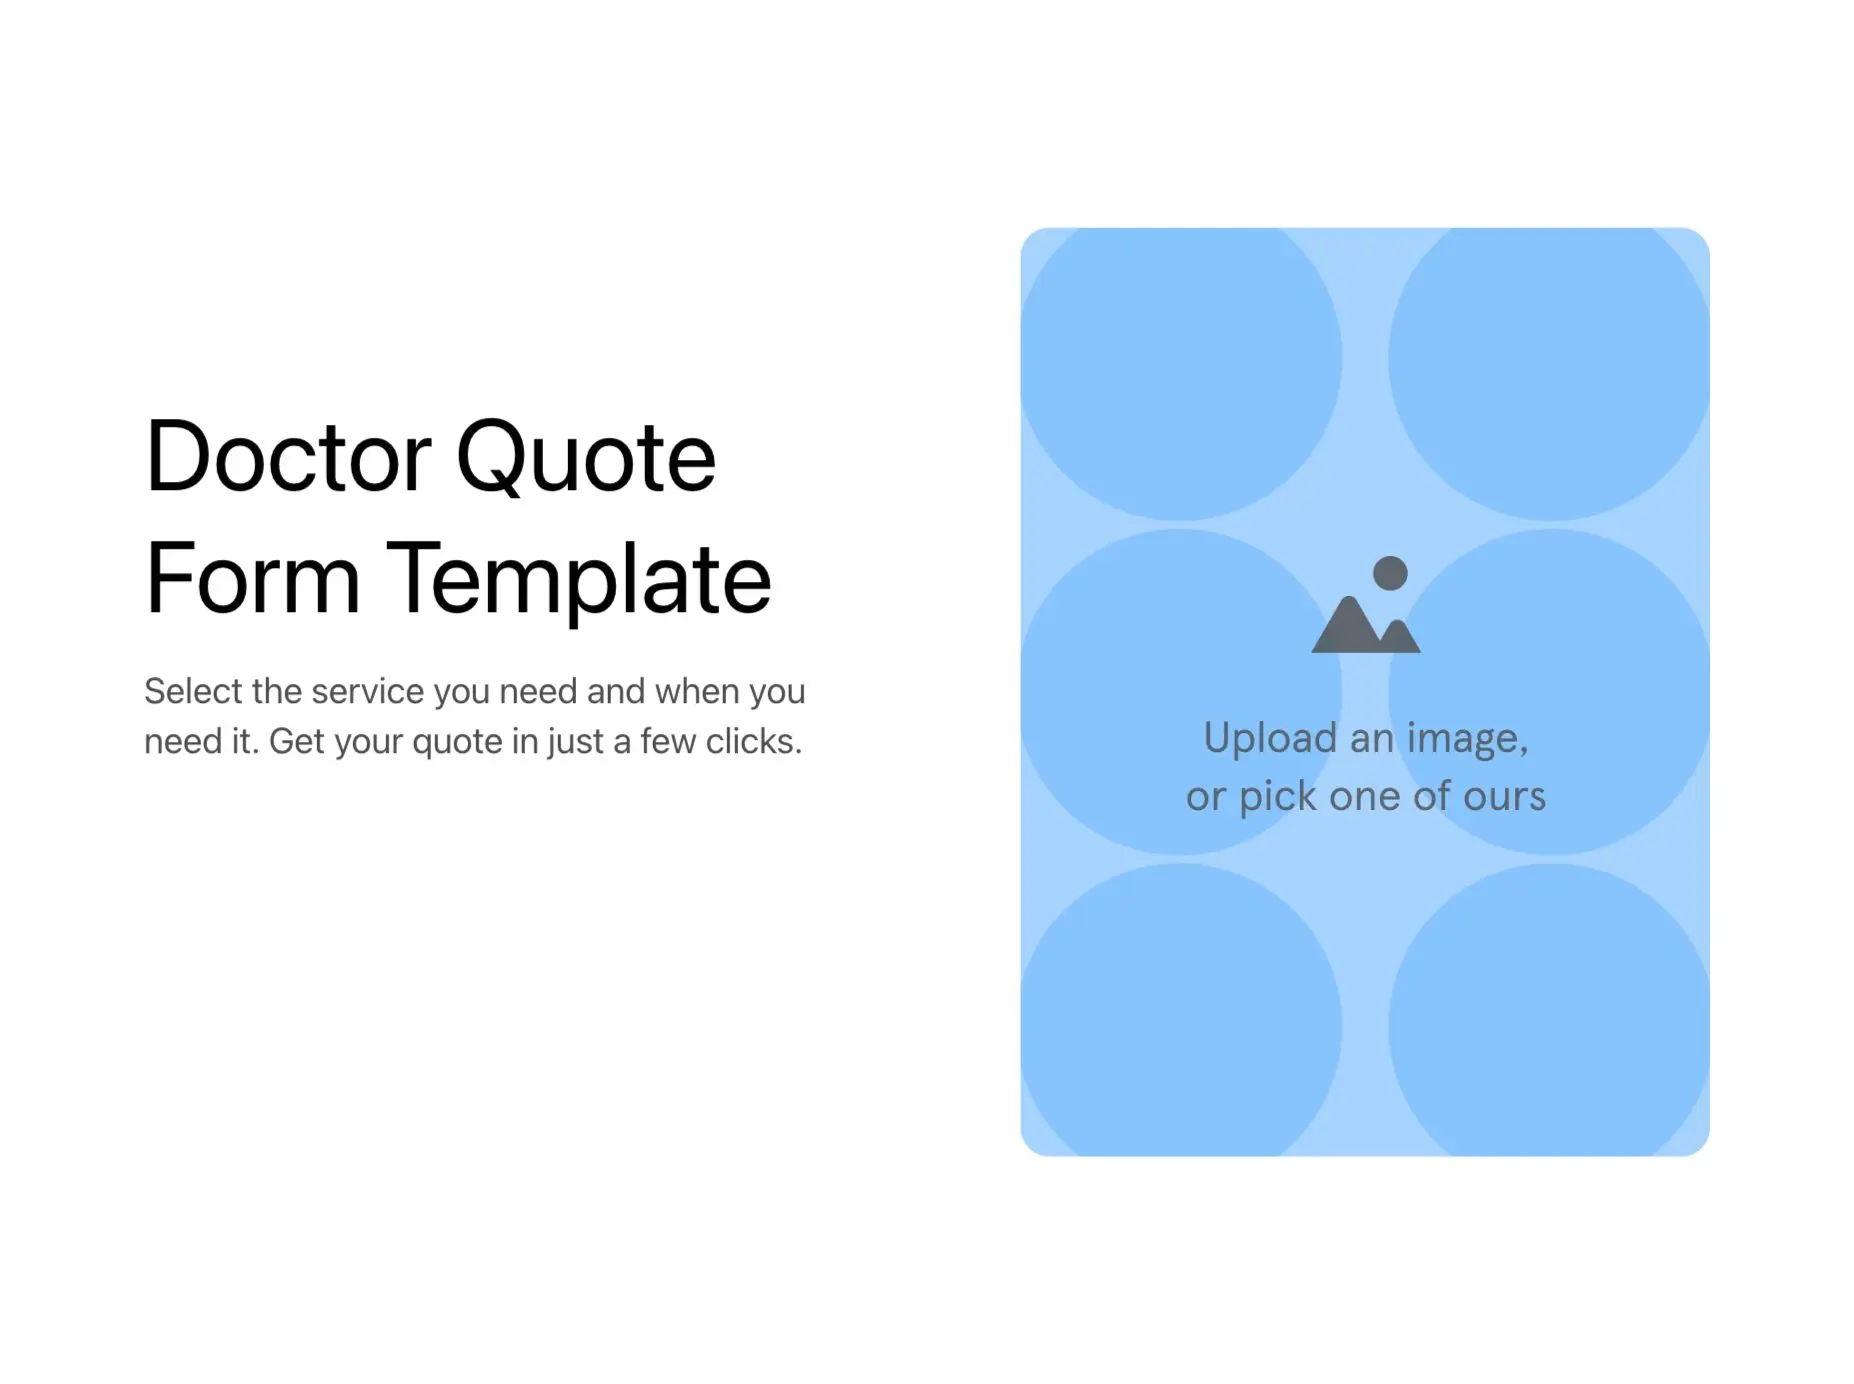 Doctor Quote Form Template Hero